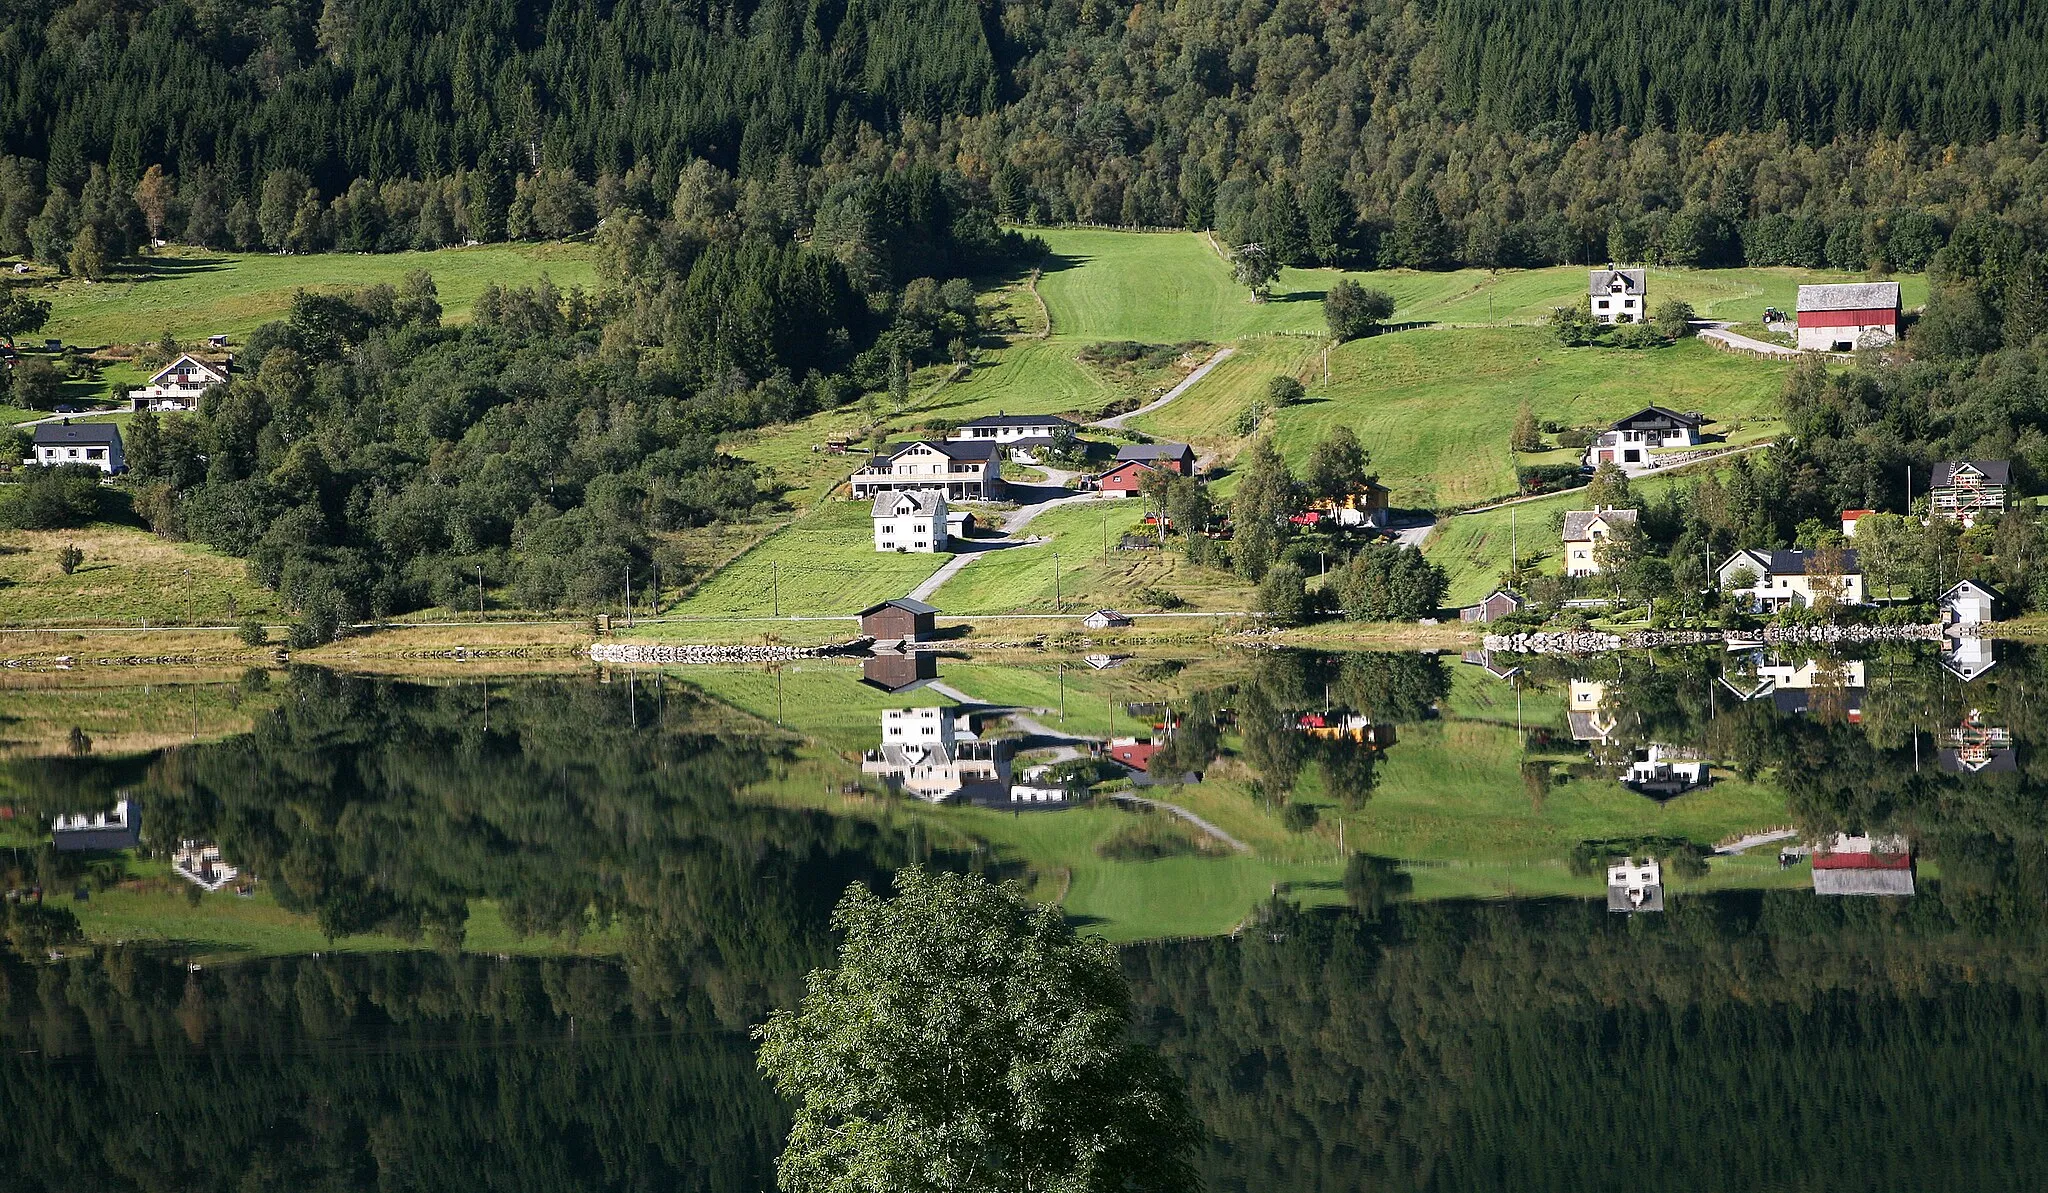 Photo showing: Reflection of the landscape in Voldsfjorden. Seen near the village of Volda in the county of Fylke Møre og Romsdal, Norway.